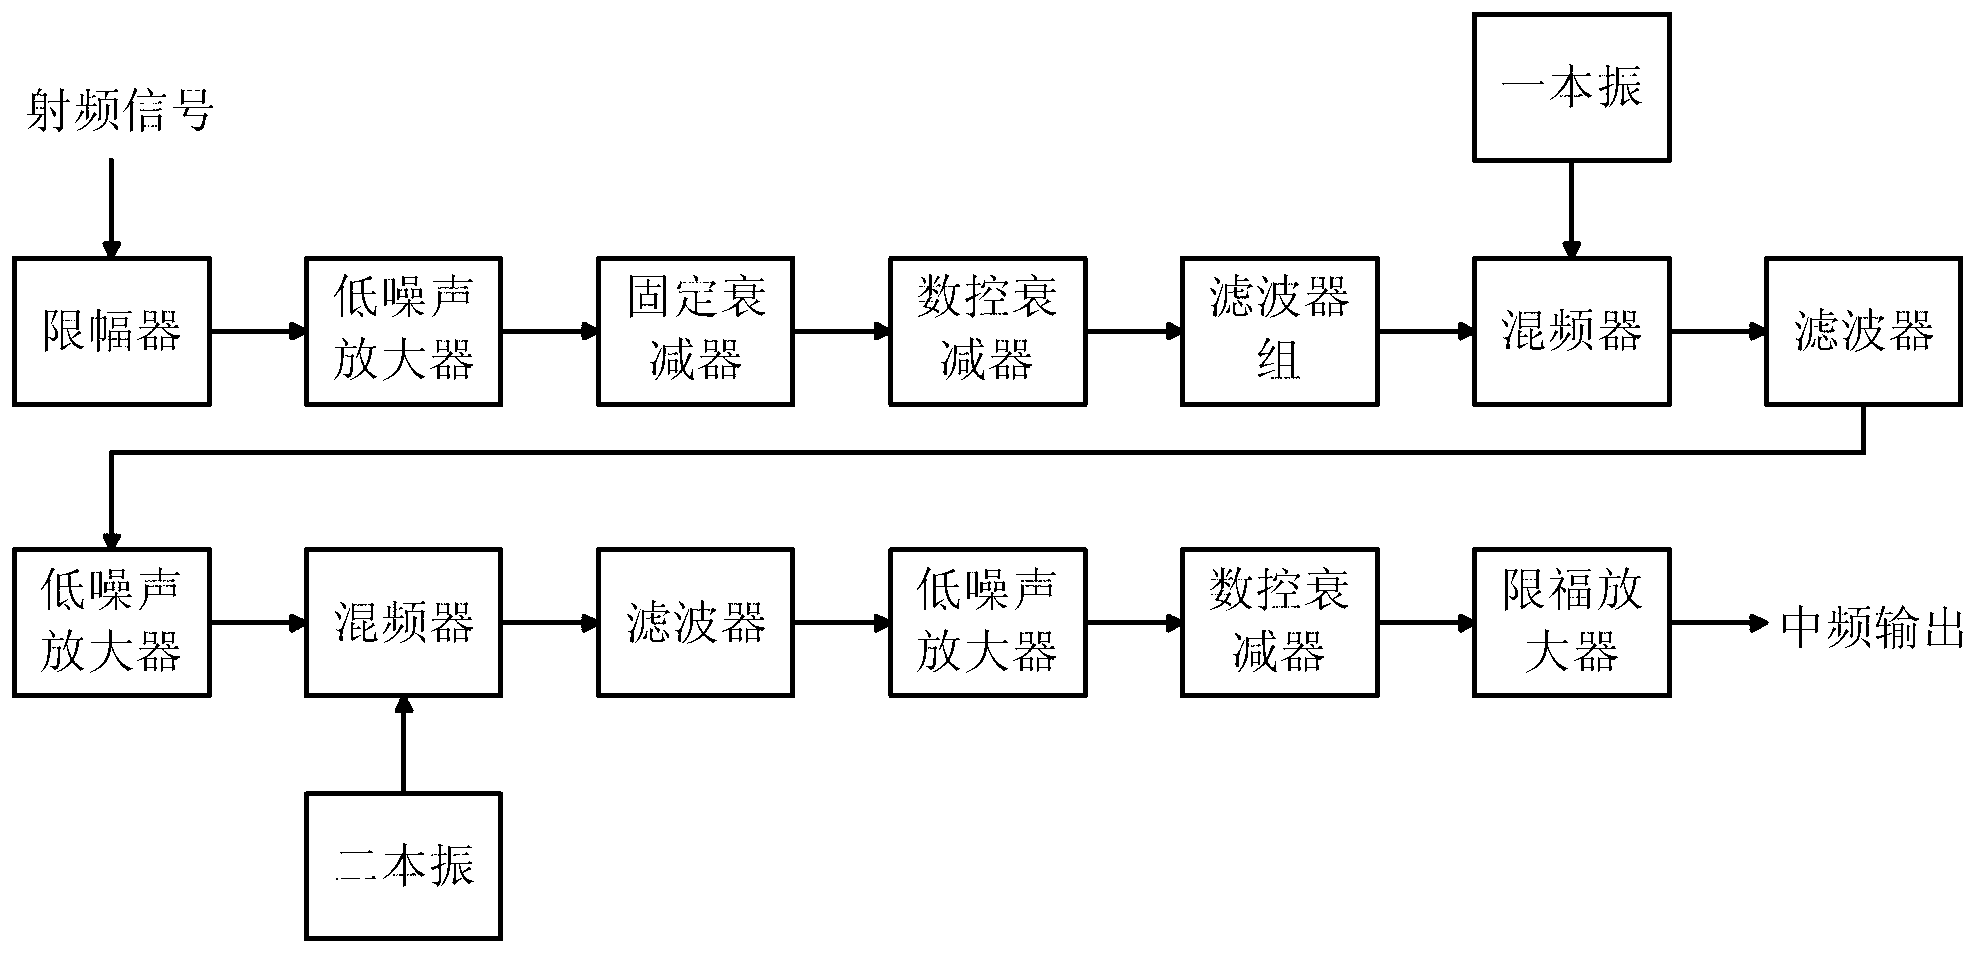 System utilizing CMMB (China Mobile Multimedia Broadcasting) signal to detect target and method thereof